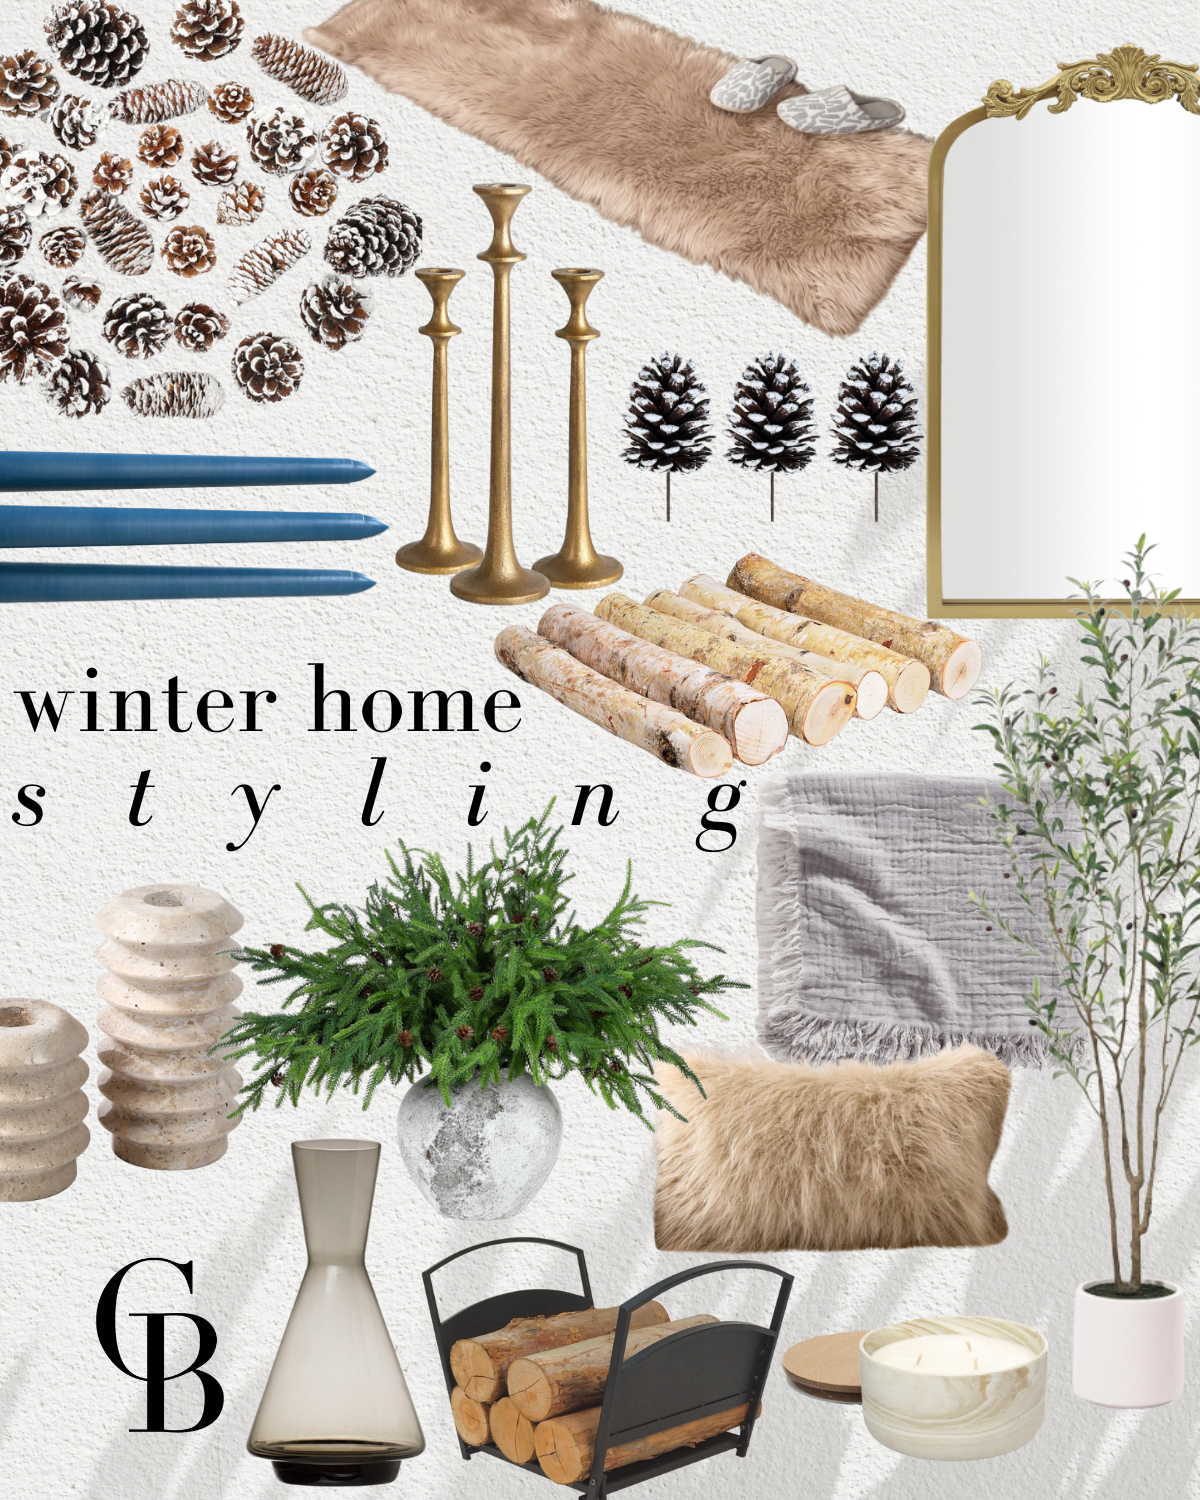 tips for styling your home during the winter months | home, home styling, winter months, winter season, winter decor, home decor, winter home styling, faux greenery, vase, decanter, mirror, pinecones